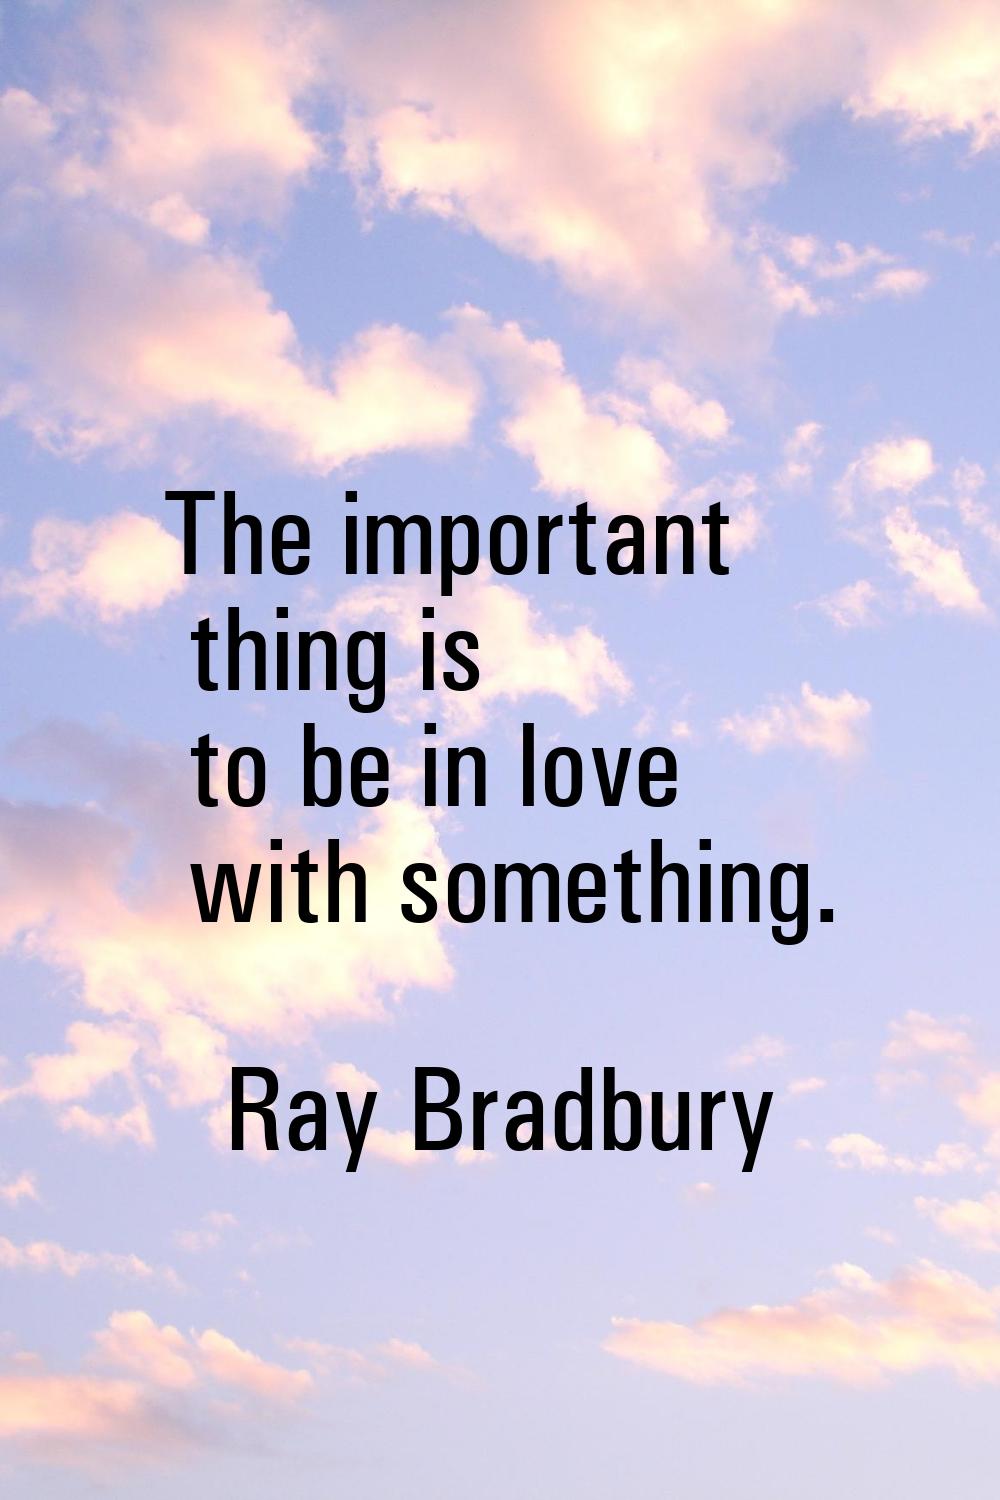 The important thing is to be in love with something.